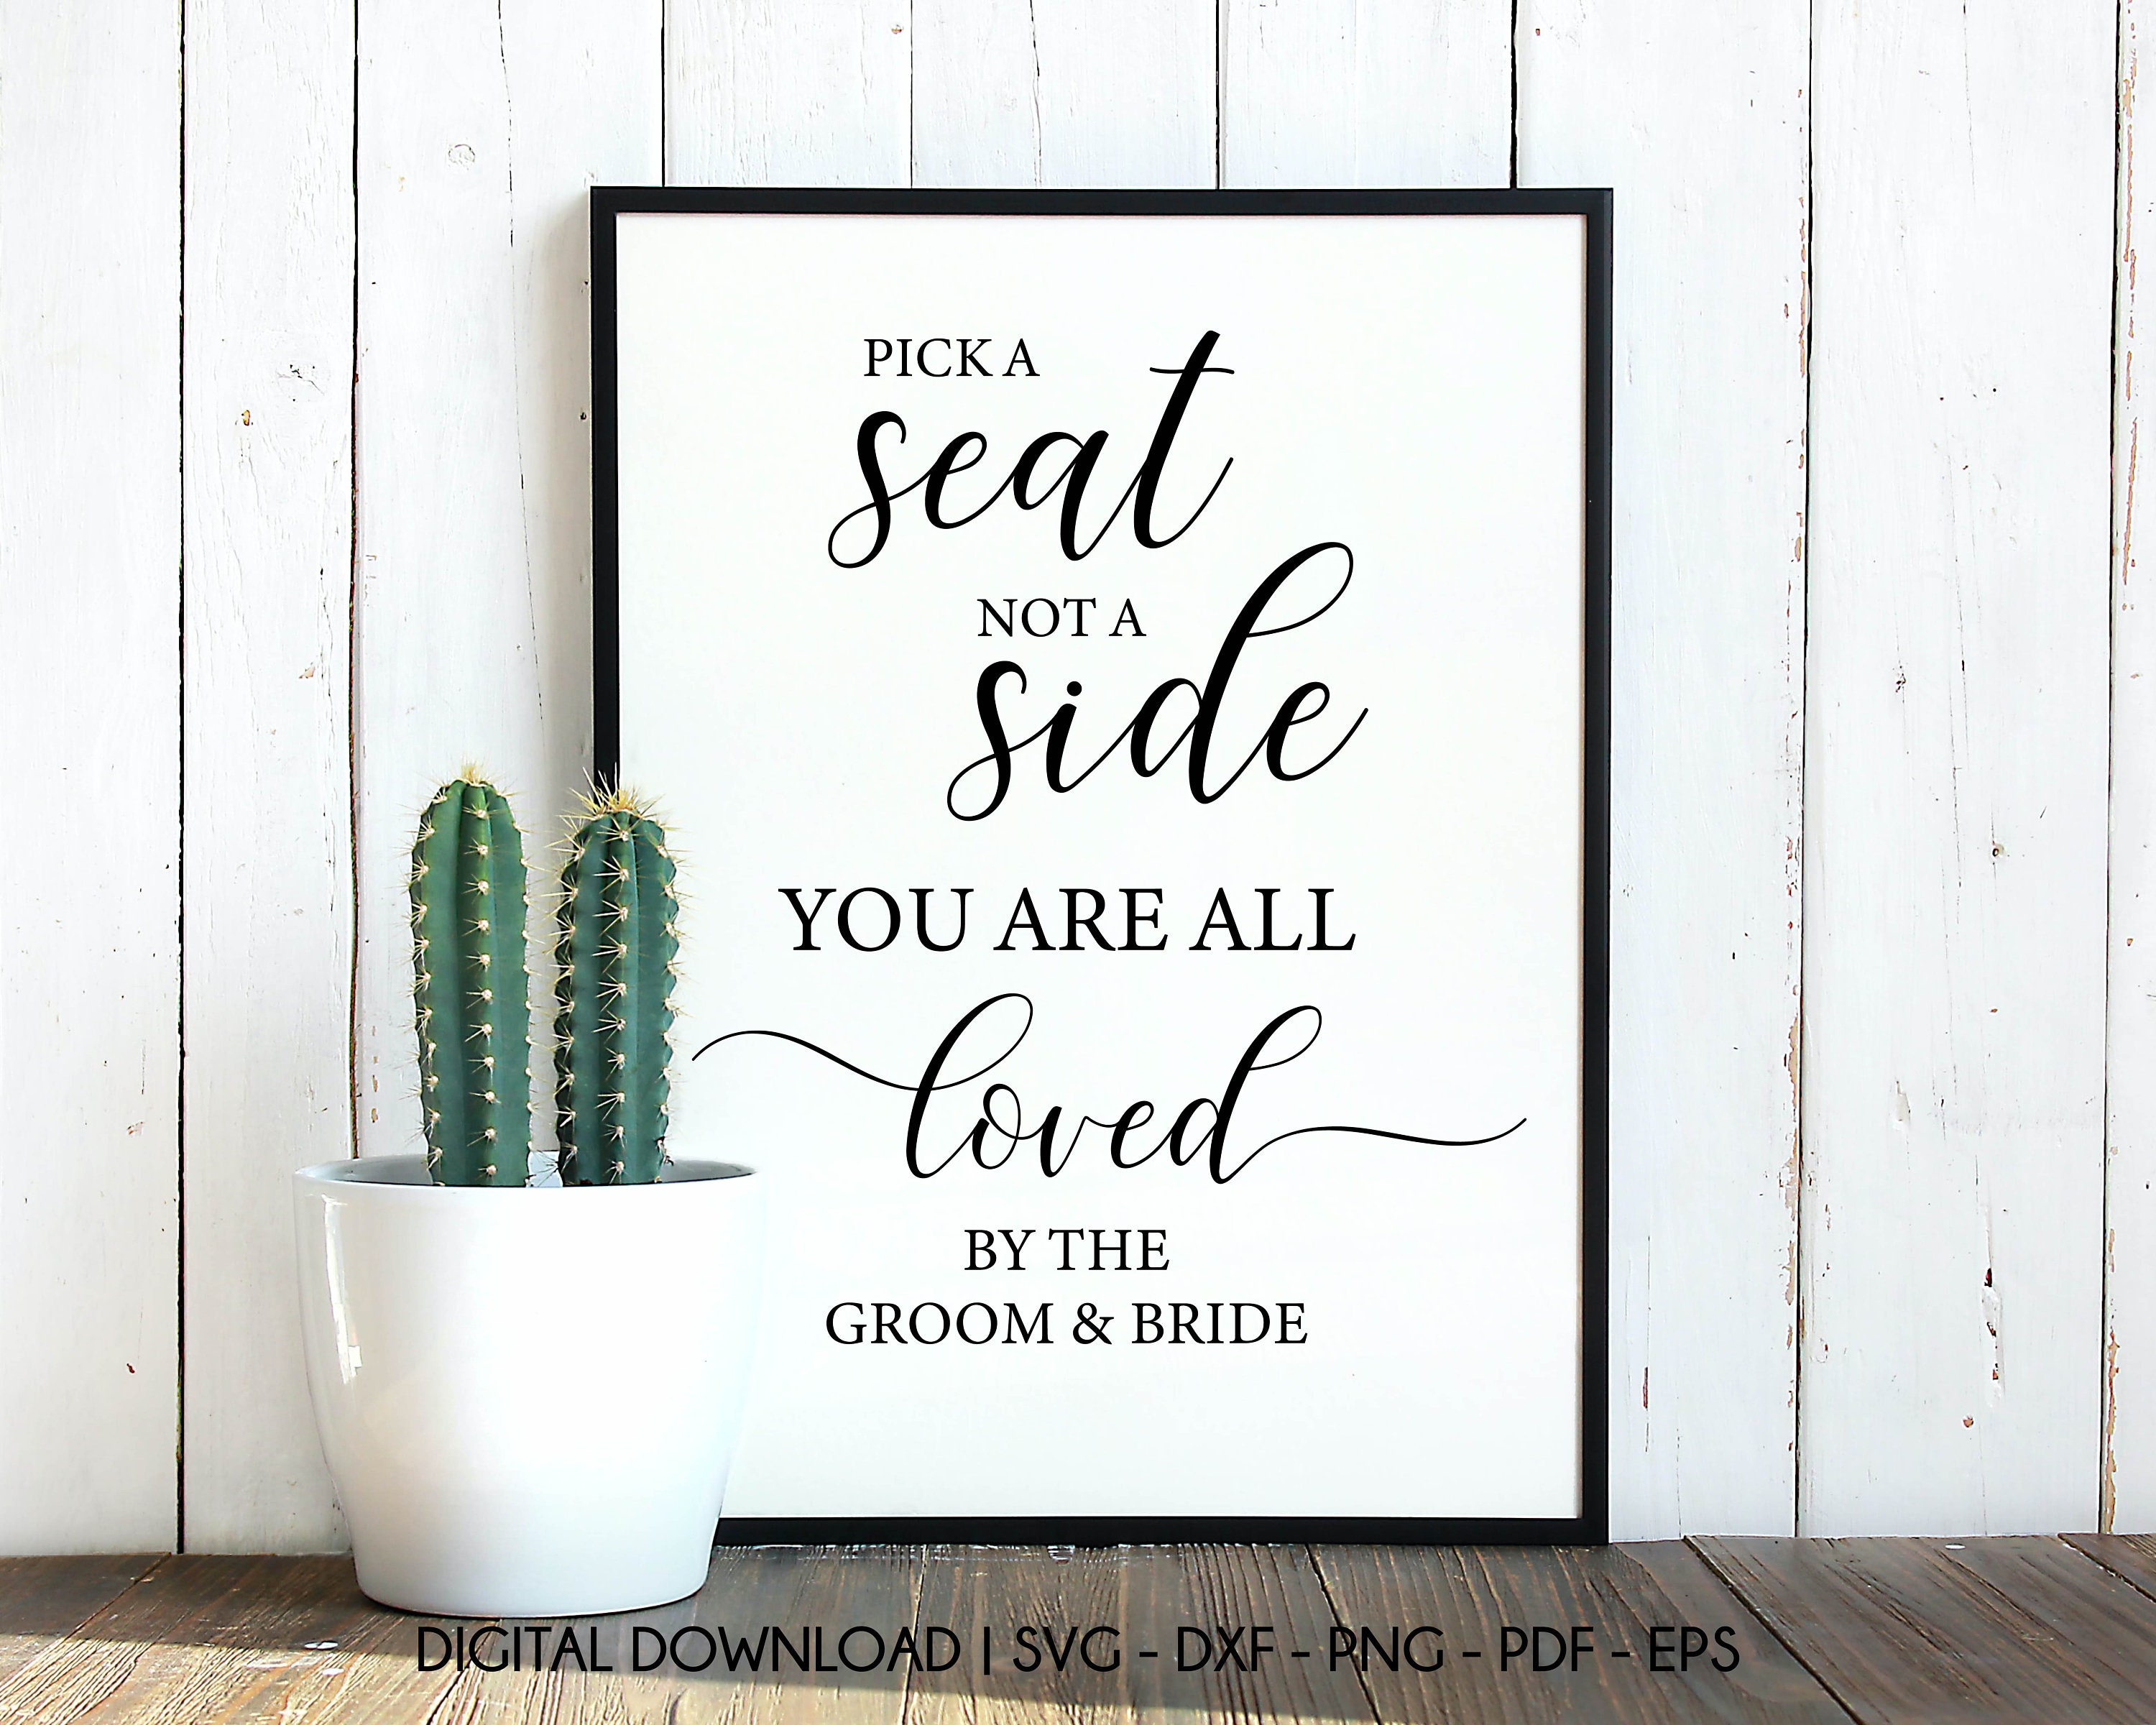 Rustic Wood Wedding Sign / Pick A Seat Not A Side Sign / Rustic